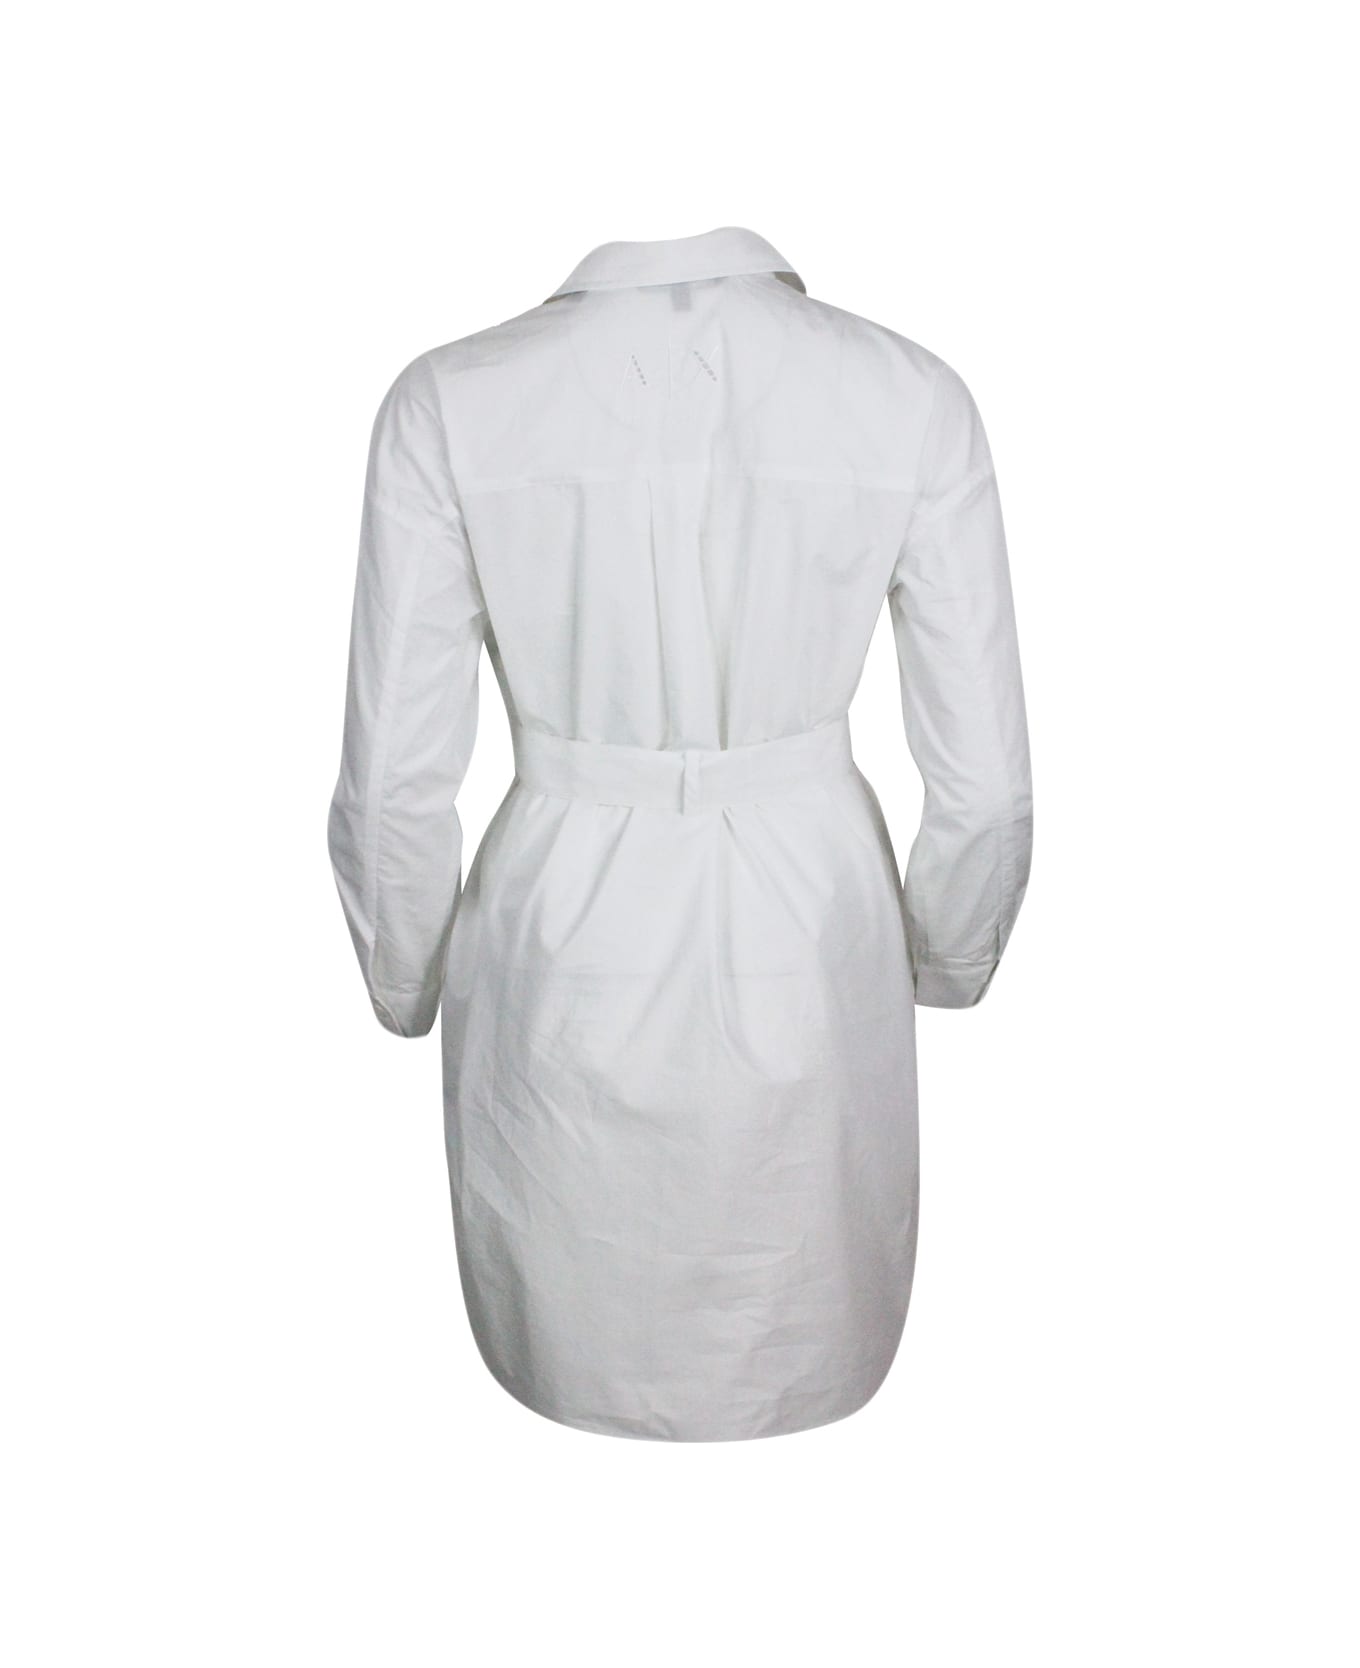 Armani Collezioni Dress Made Of Soft Cotton With Long Sleeves, With Button Closure On The Front And Belt. - White